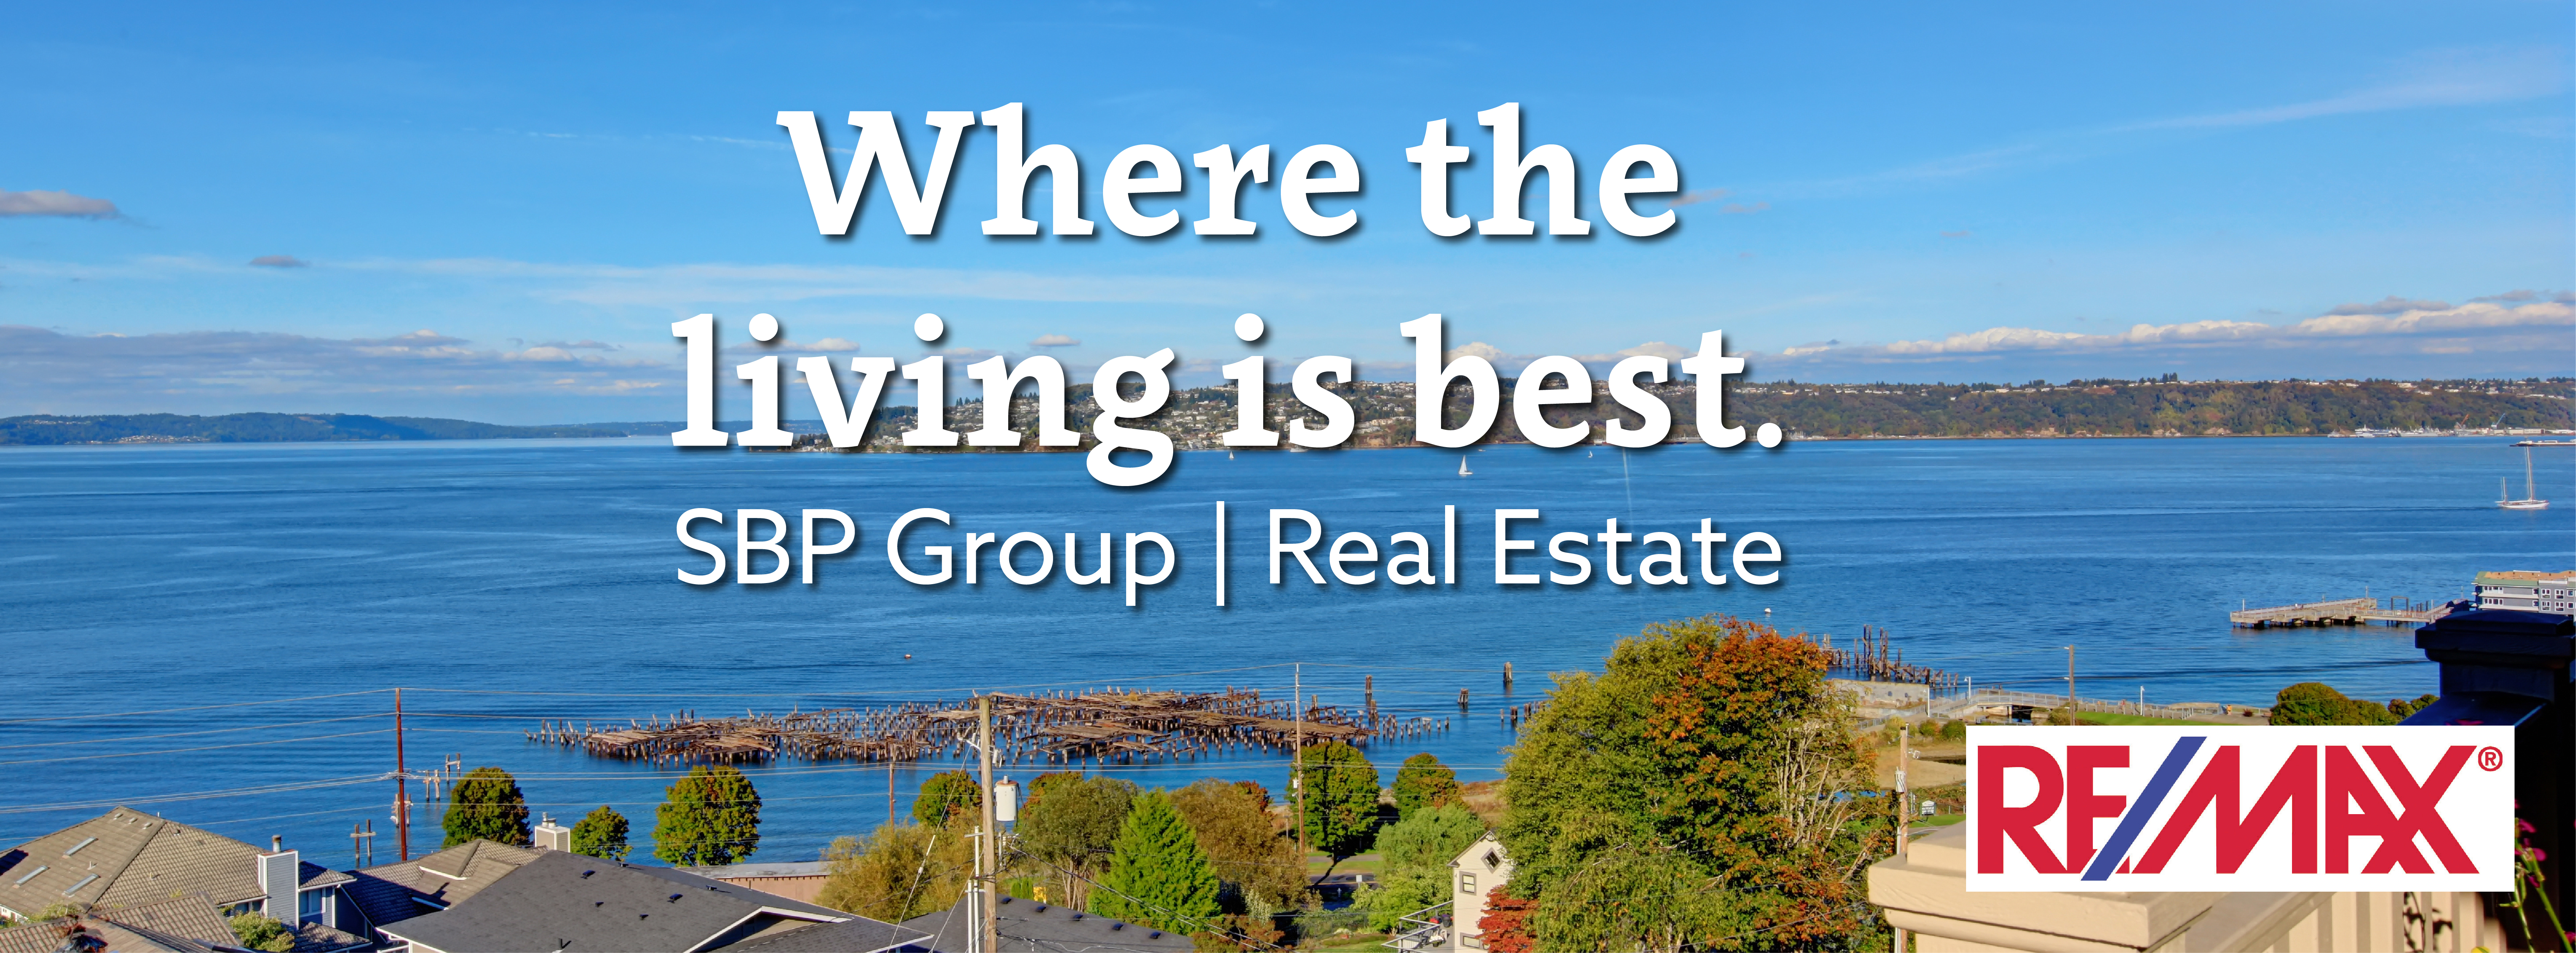 Shannon Bell-Peterson: Tacoma Real Estate Expert | 4801 S 19th St, Tacoma, WA, 98405 | +1 (253) 273-8433